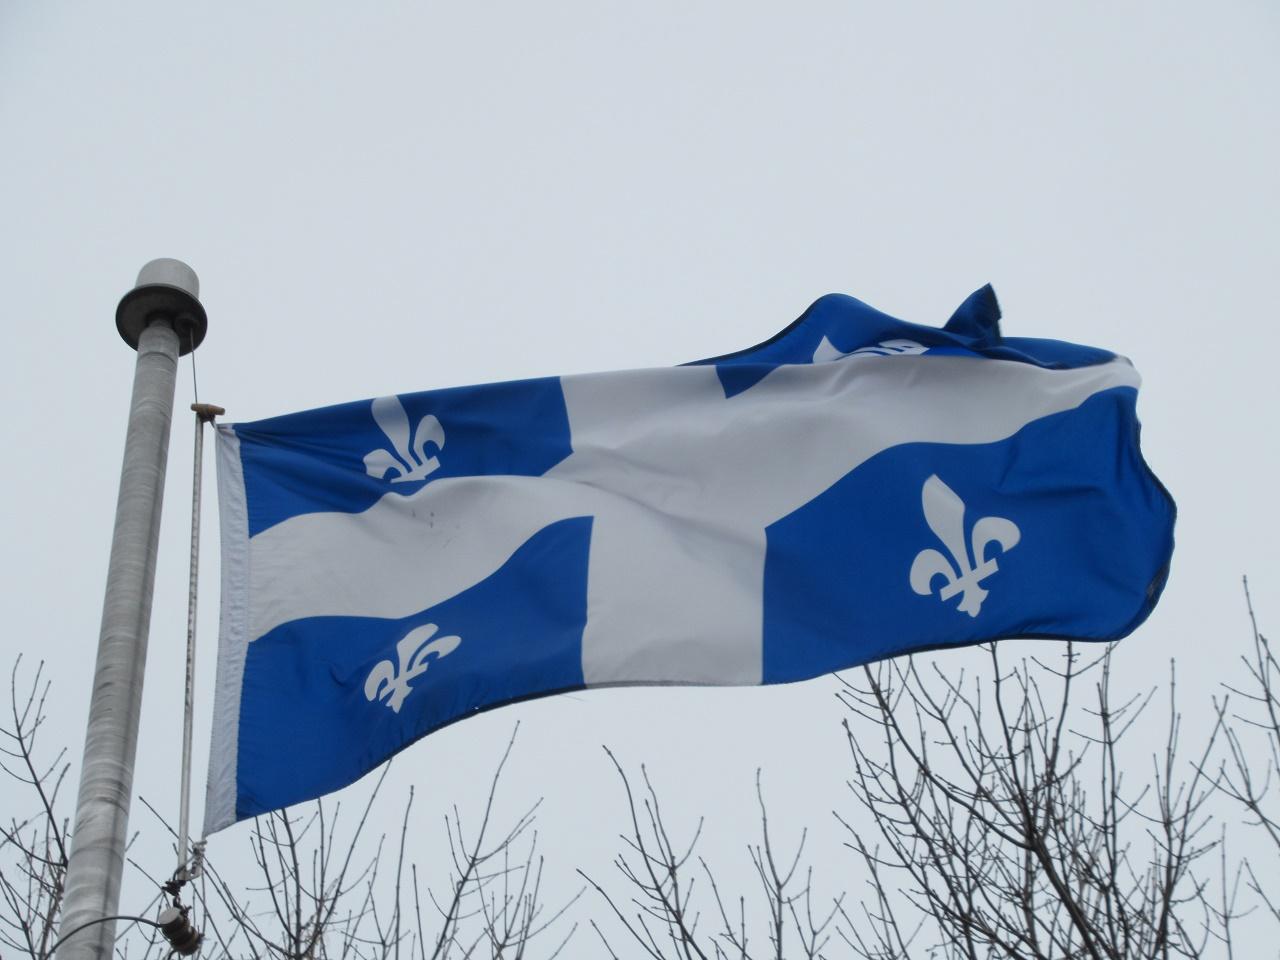 Québec driver’s licence offices reopening